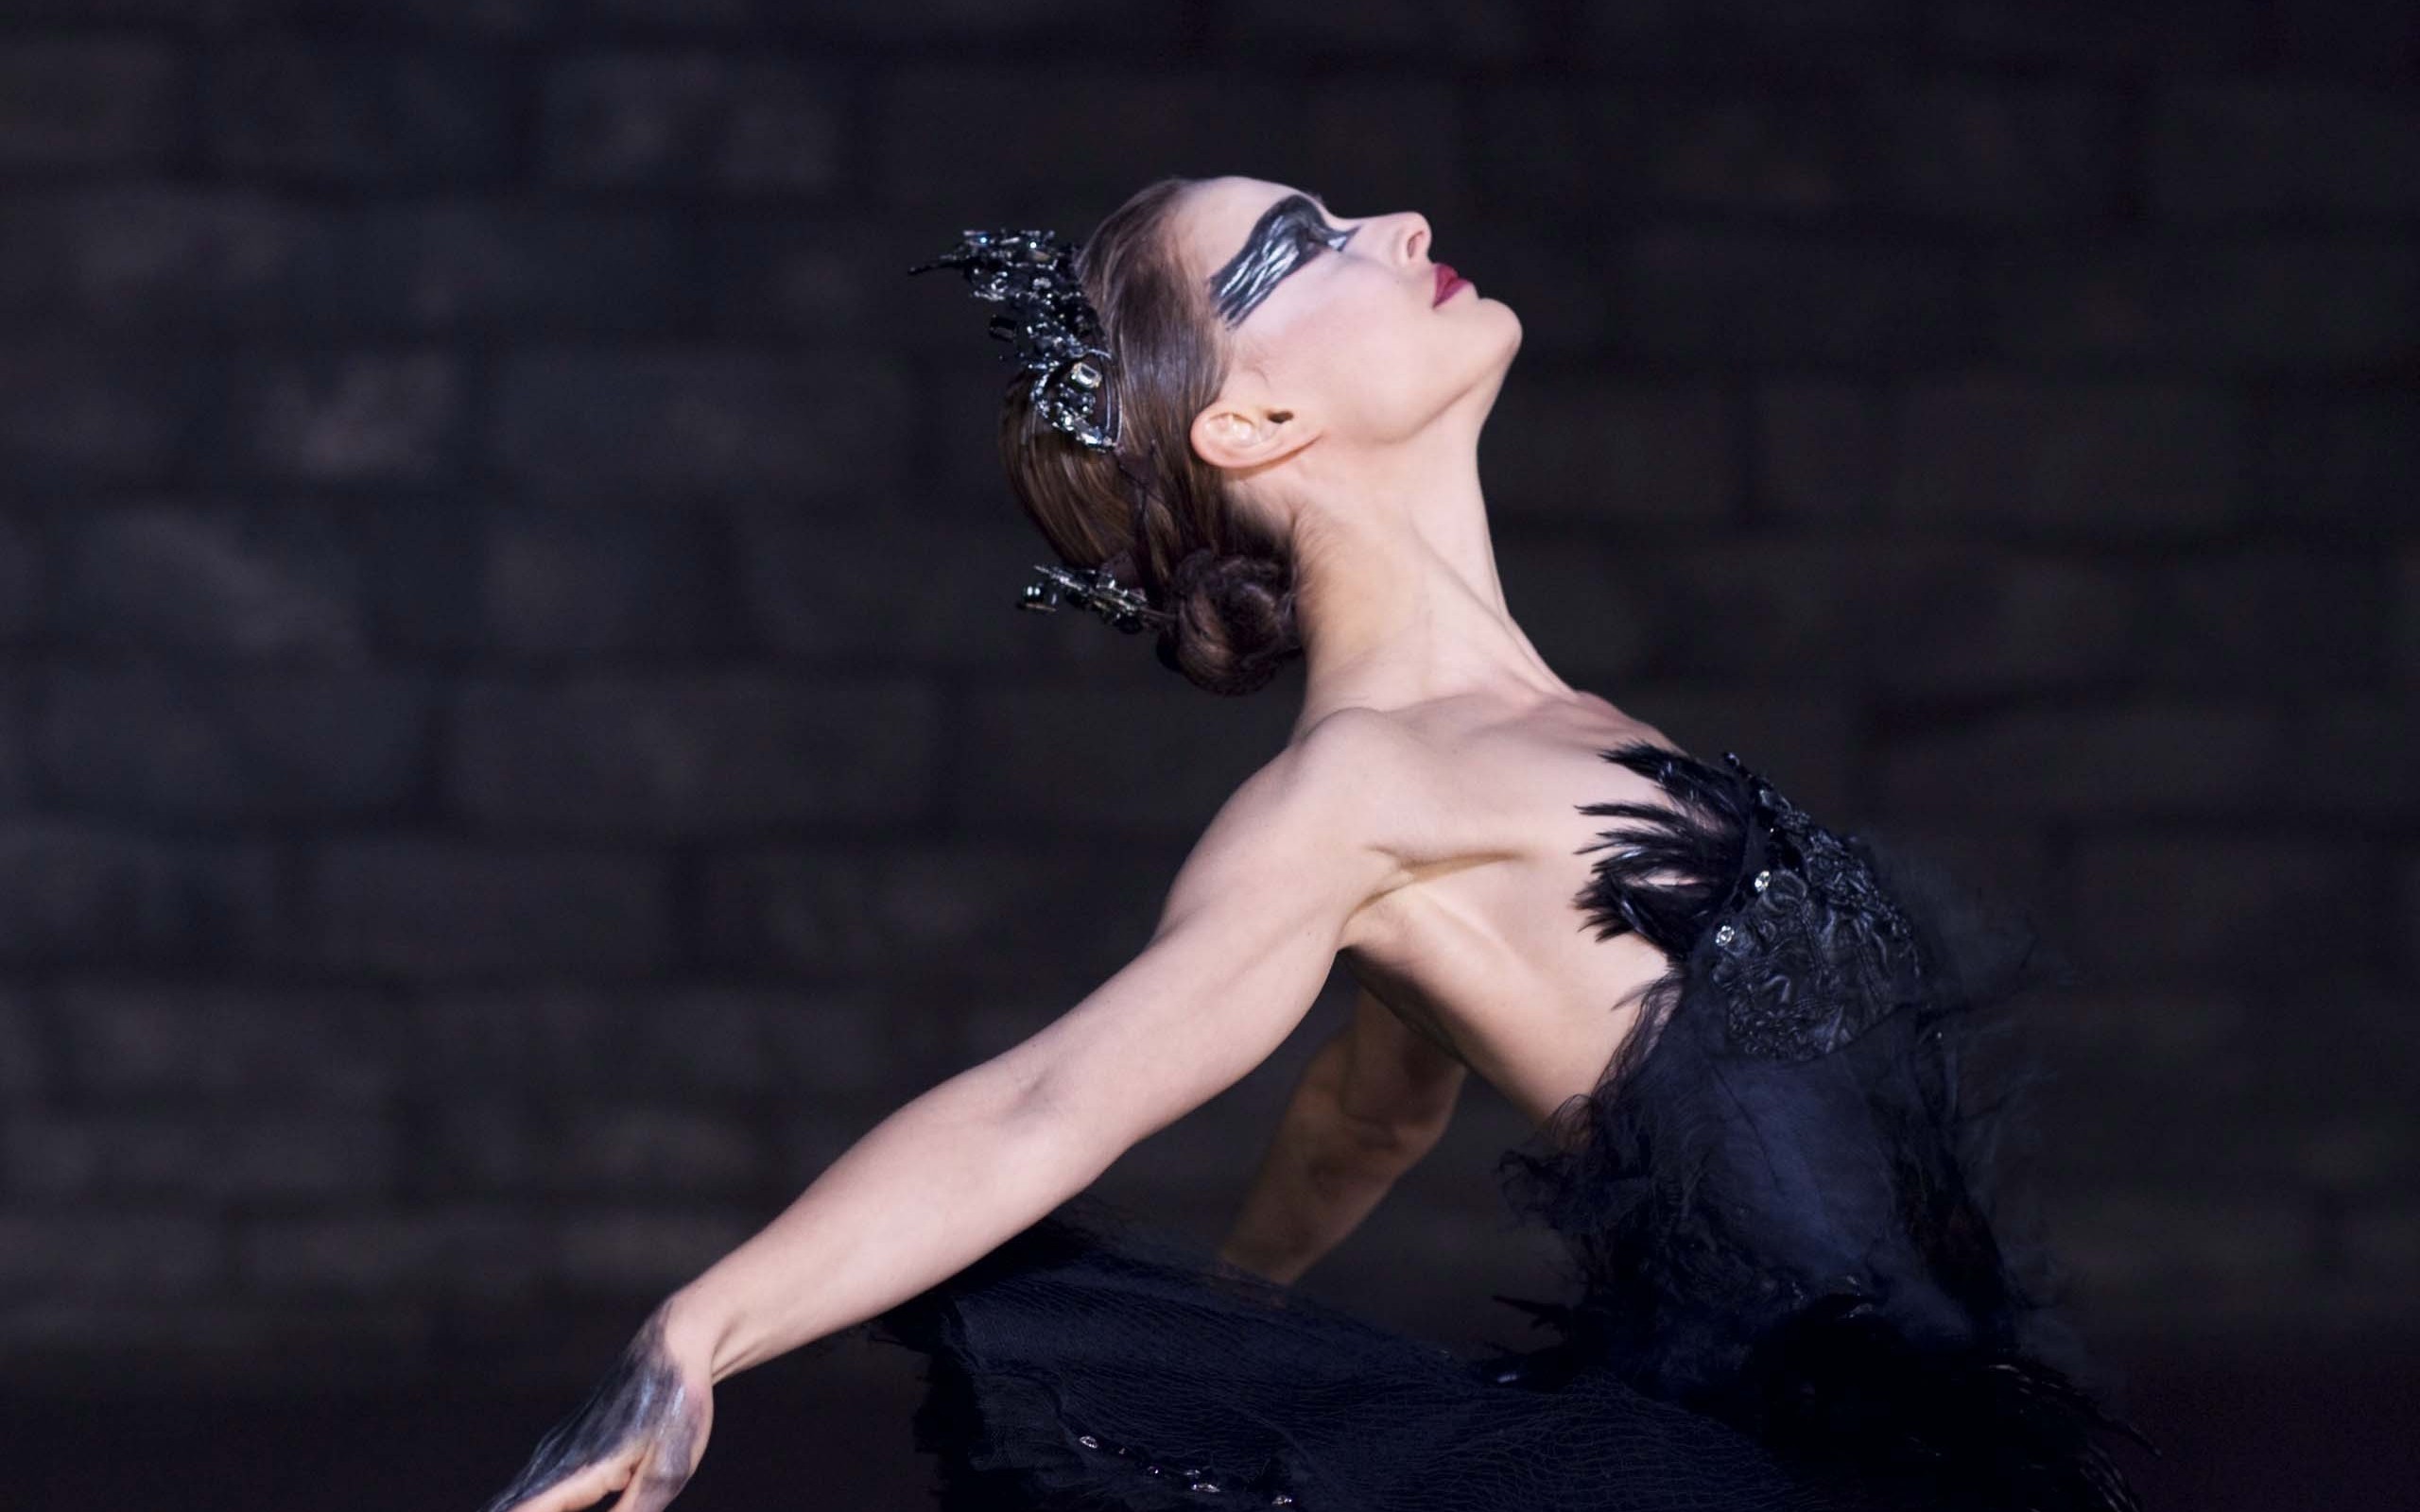 Black Swan Picture